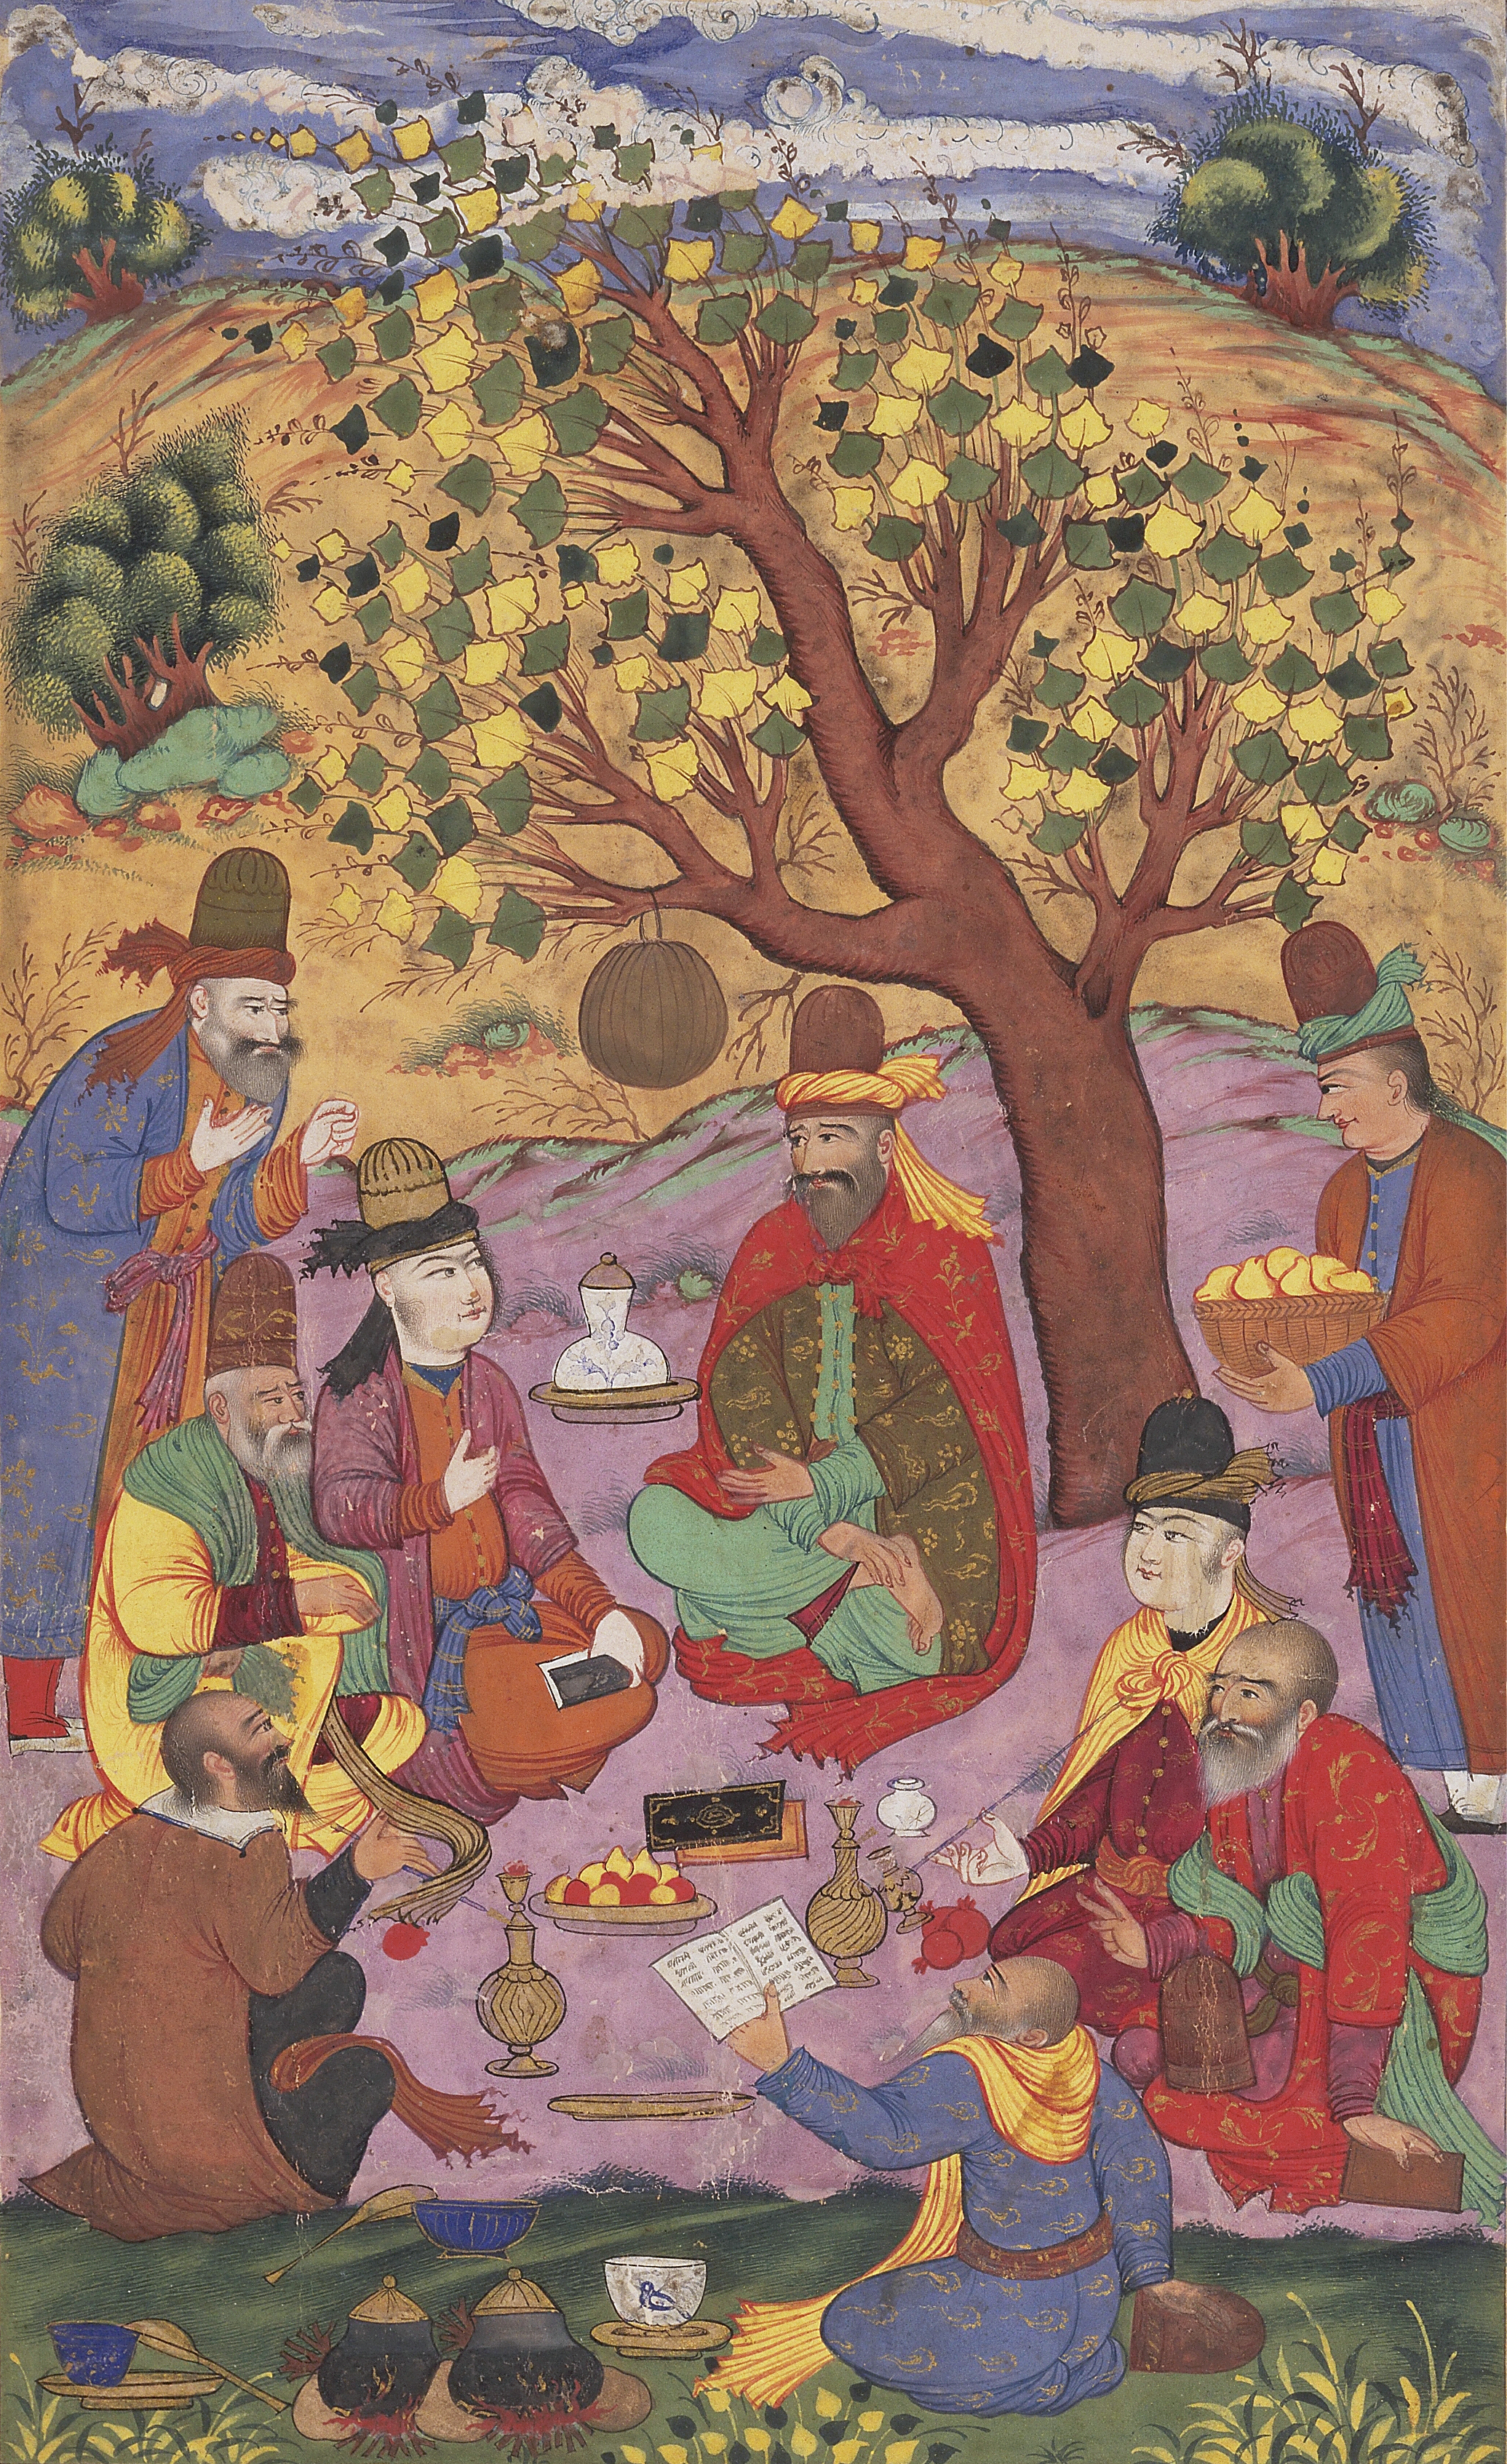 Colorful, detailed painting of 8 men dressed in robes and hats sitting beneath a tree, reading and eating a meal together